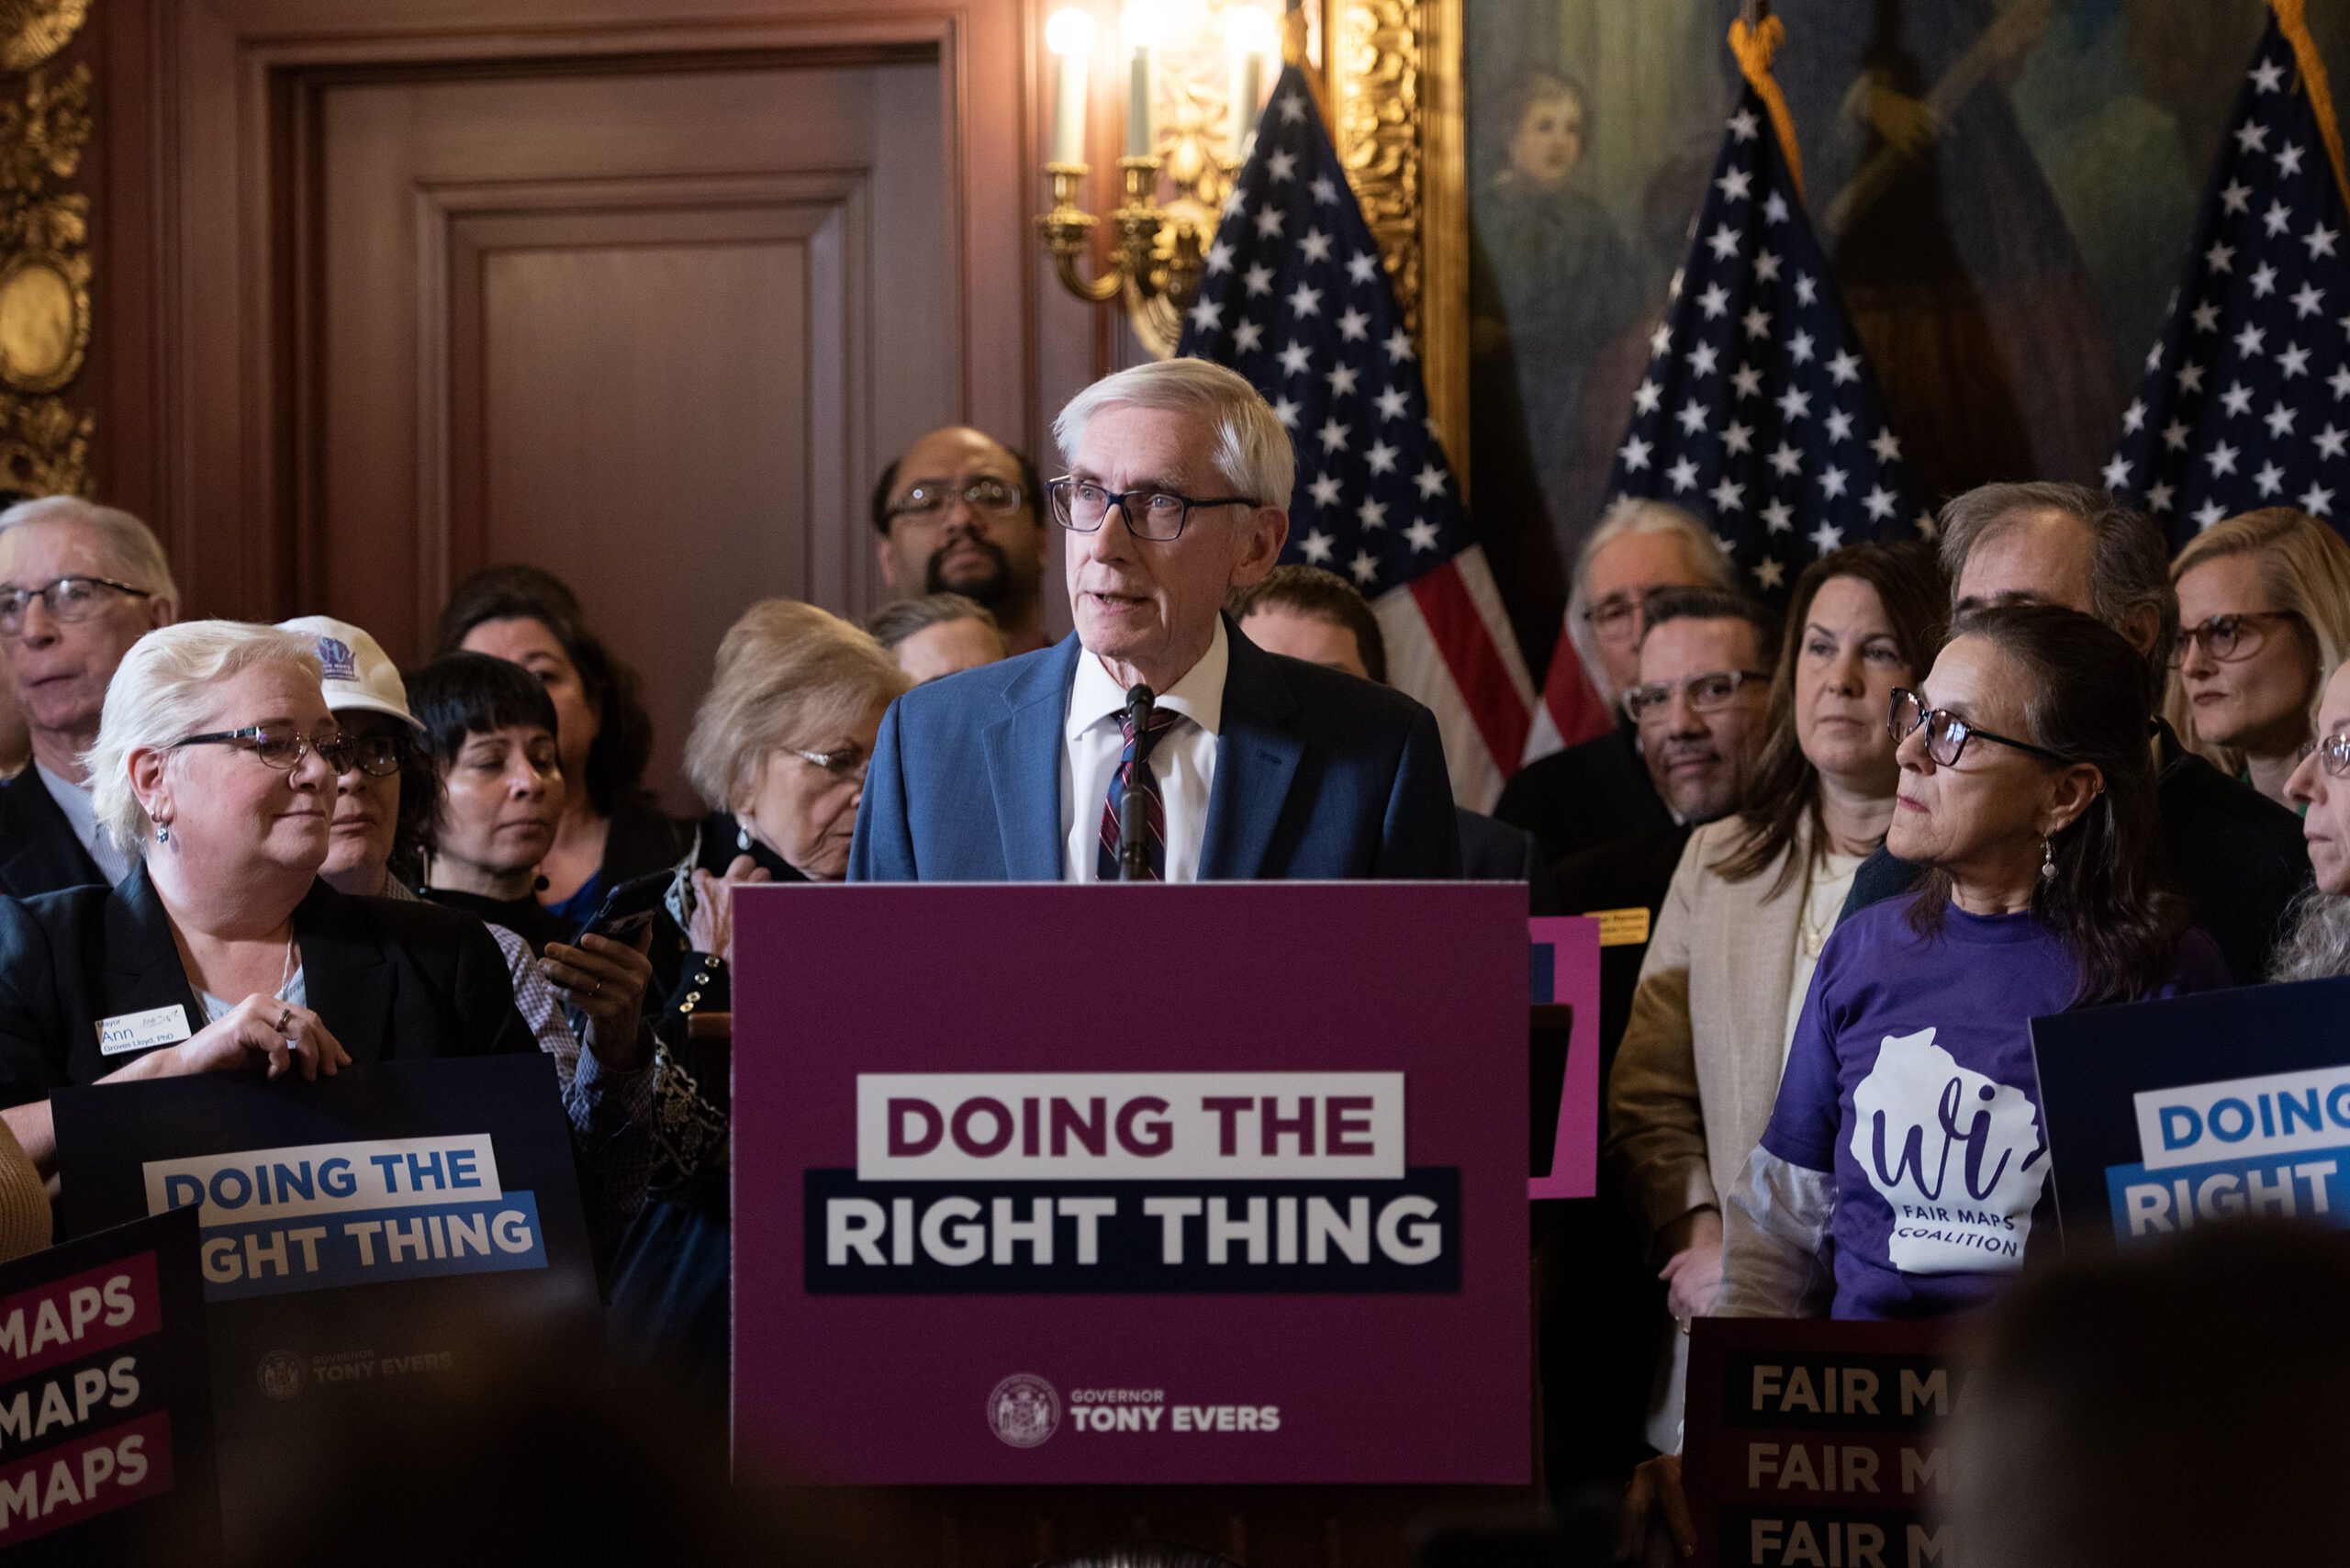 Gov. Evers speaks at a podium behind a sign that says "Doing the right thing." Supporters stand behind him.